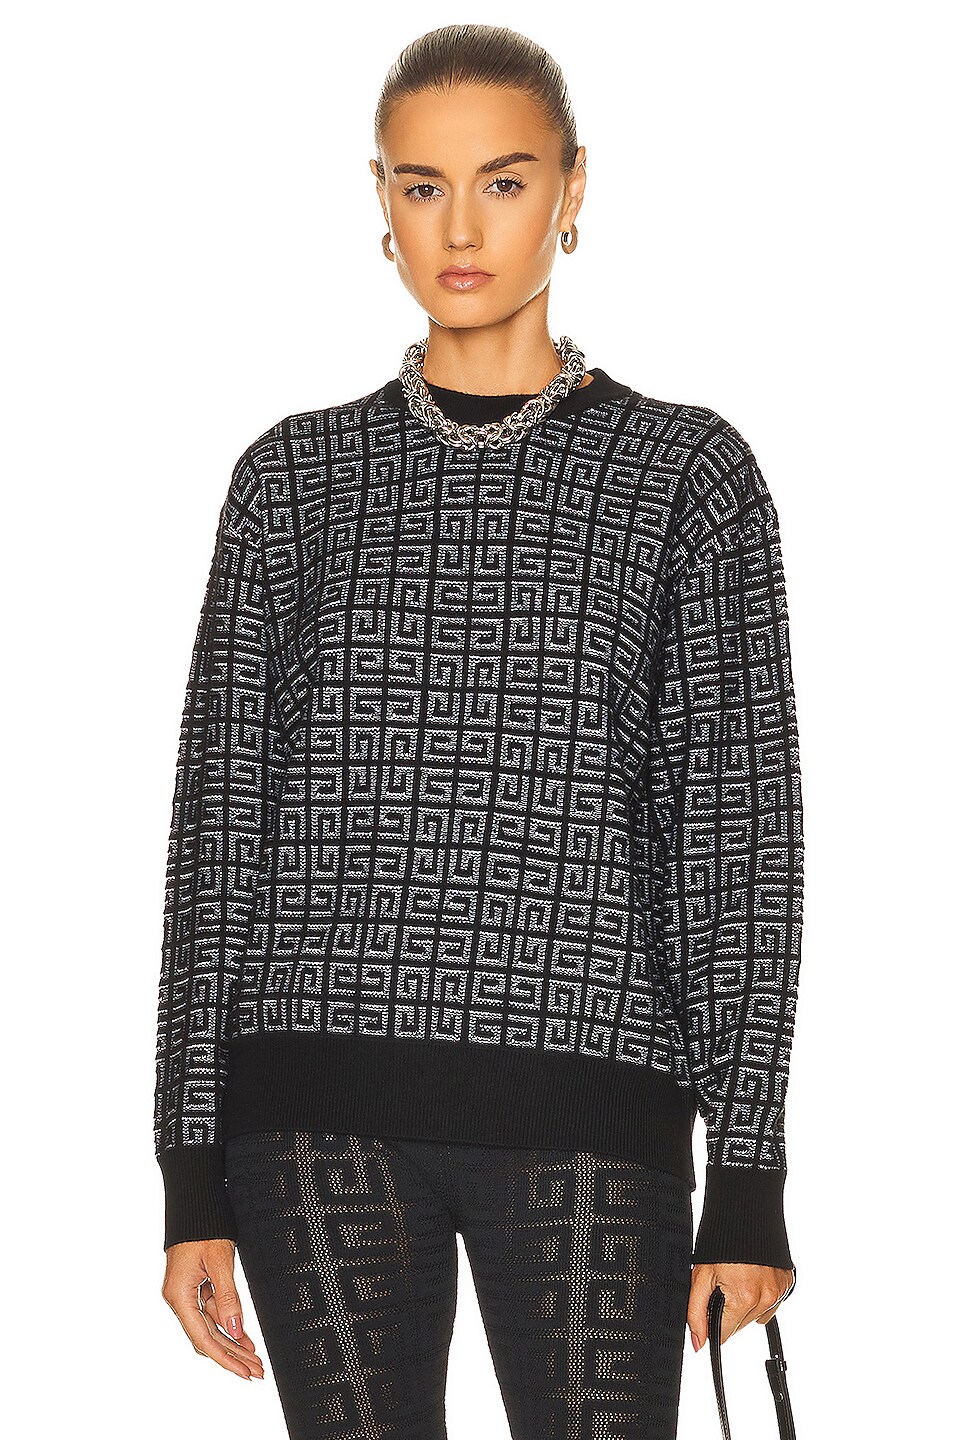 Givenchy Crew Neck Sweater in Black & White | FWRD